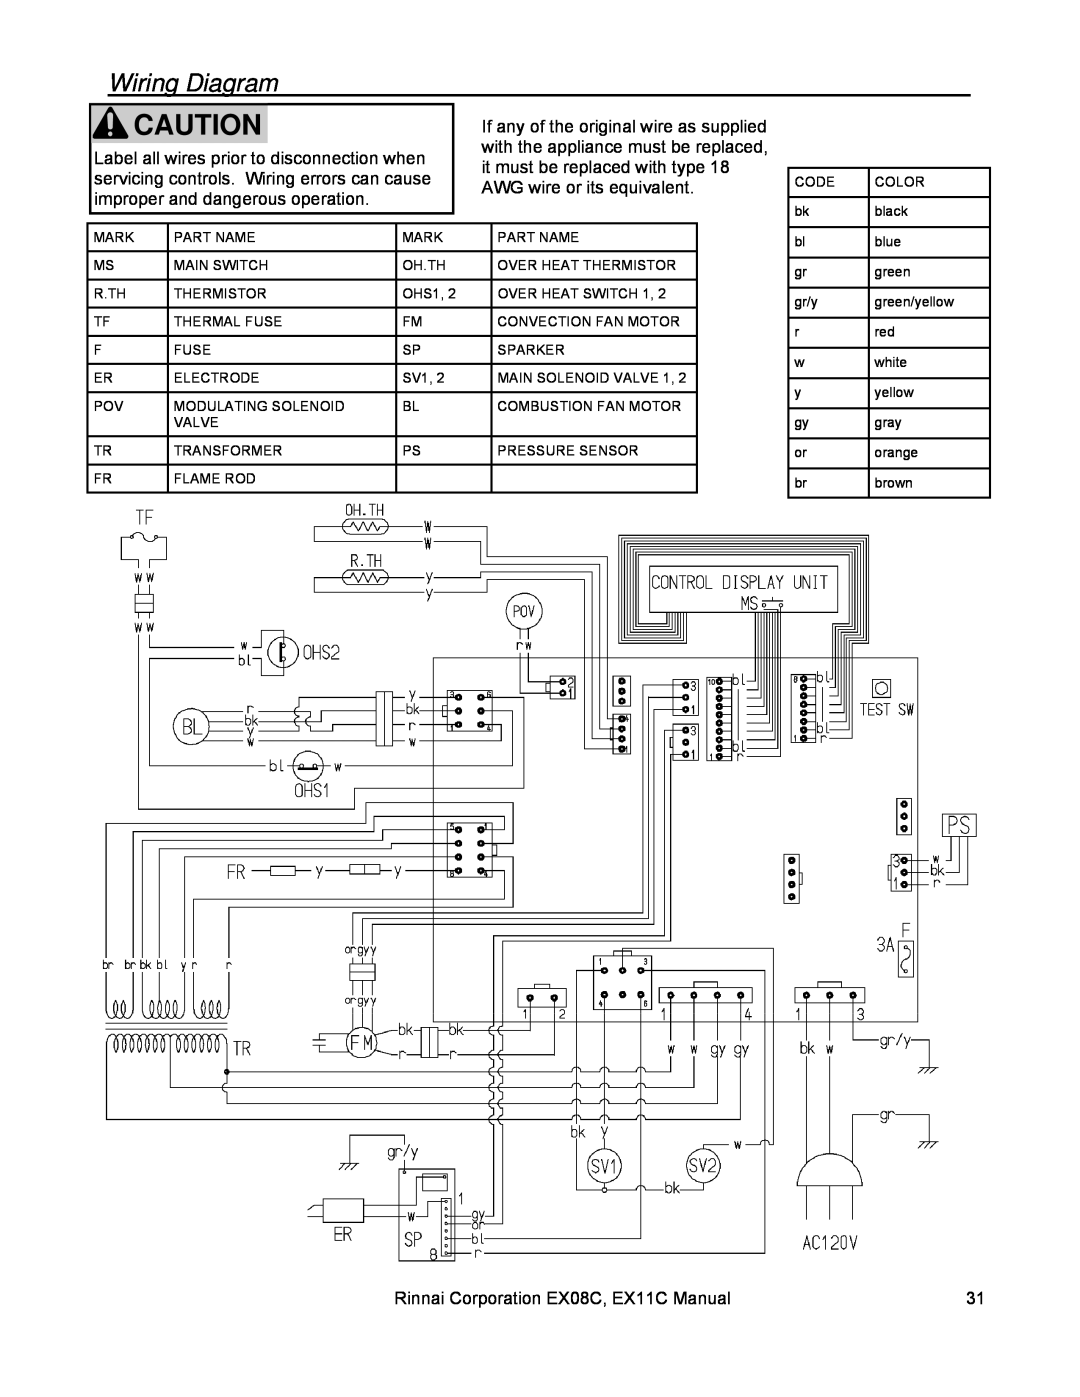 Rinnai EX08C (RHFE-202FTA) Wiring Diagram, If any of the original wire as supplied, with the appliance must be replaced 